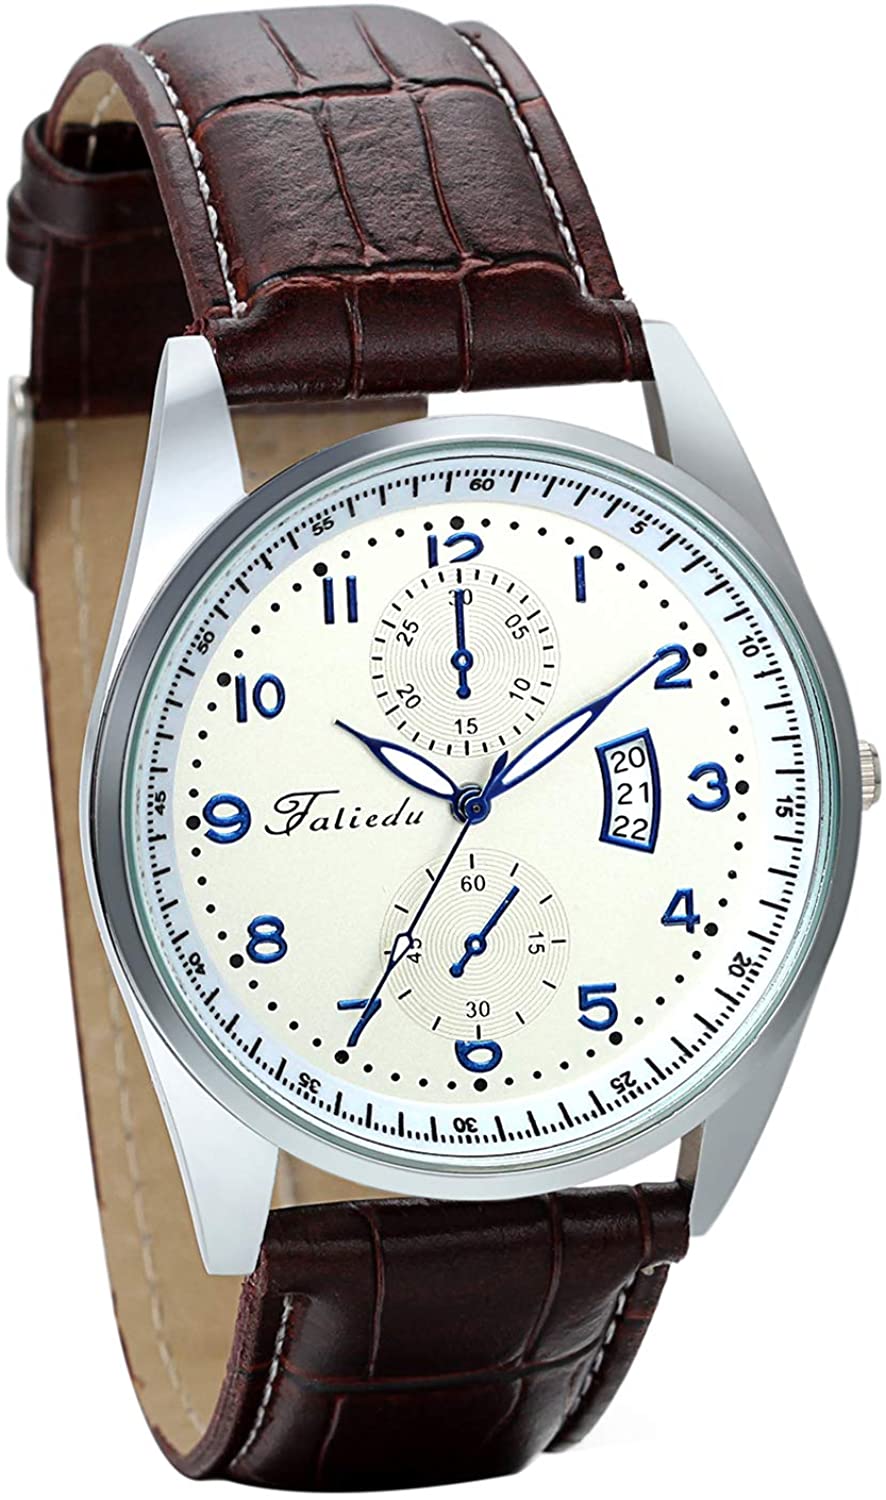 Avaner Mens Business Casual White Big Face Analog Quartz Wrist Watch with Second Hand Leather Strap